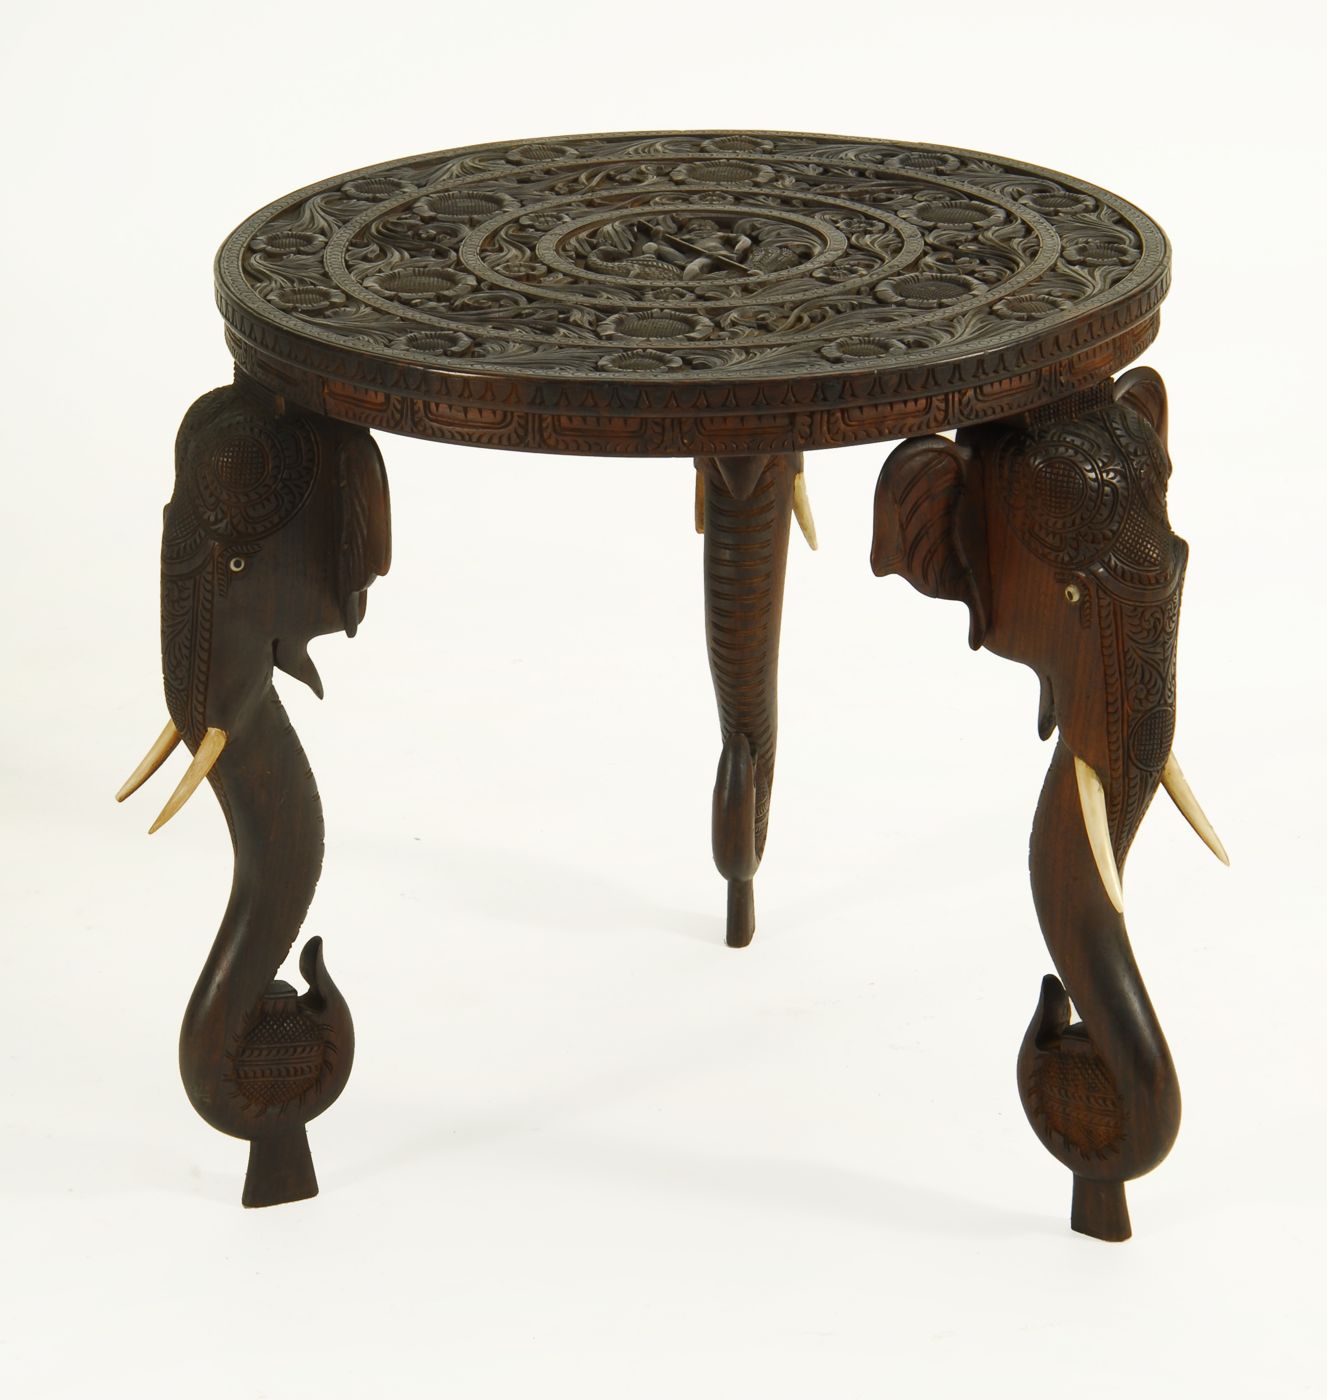 ANGLO-INDIAN ROUND CENTER TABLE WITH